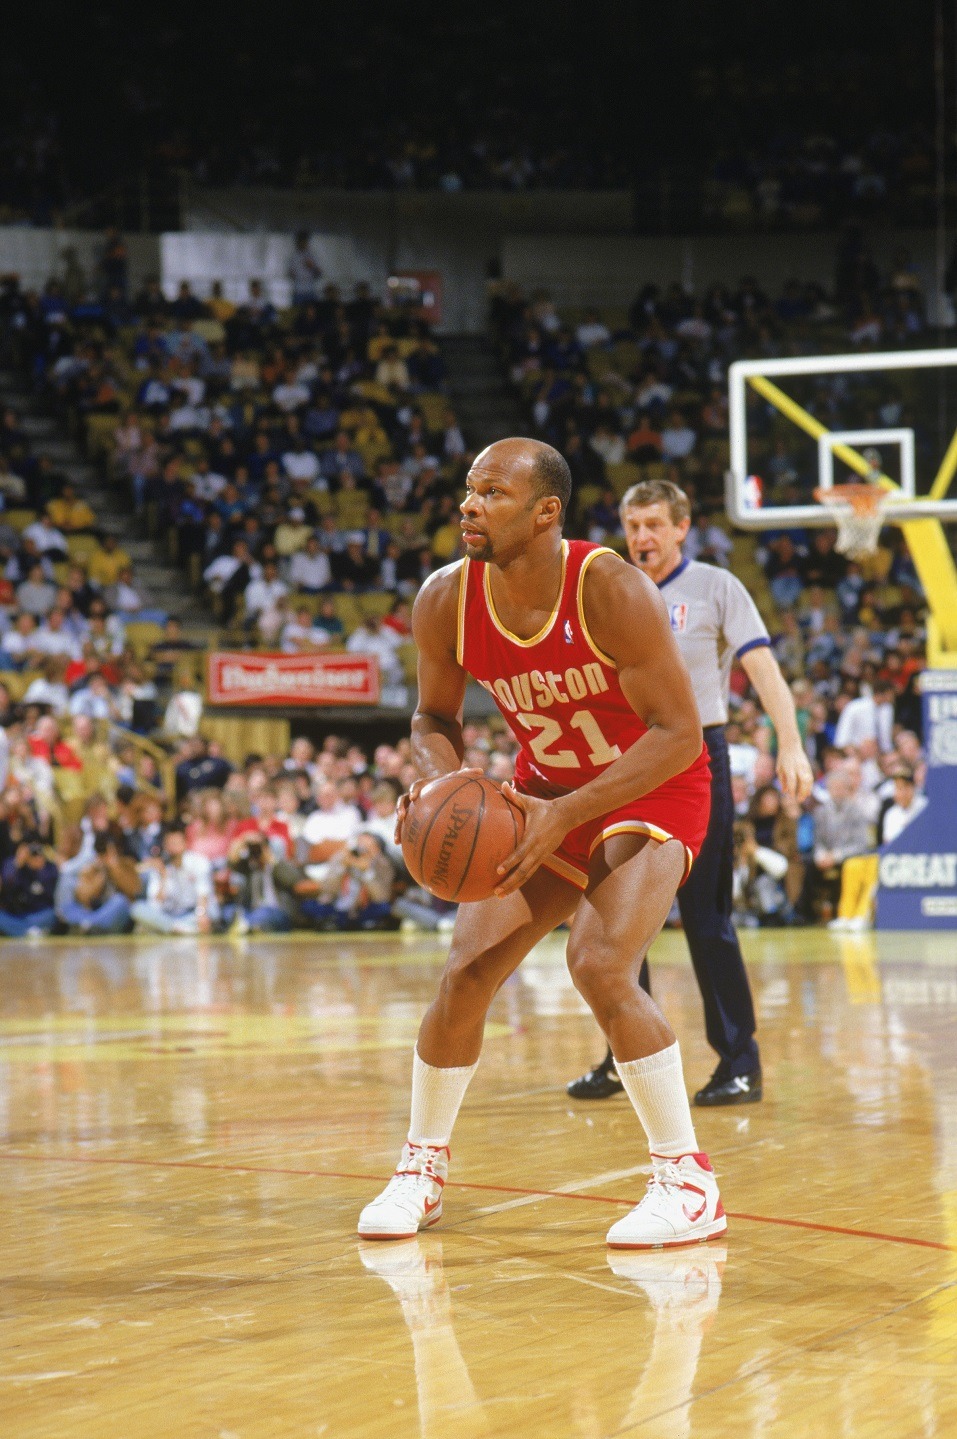 World B. Free of the Houston Rockets looks to shoot during a game